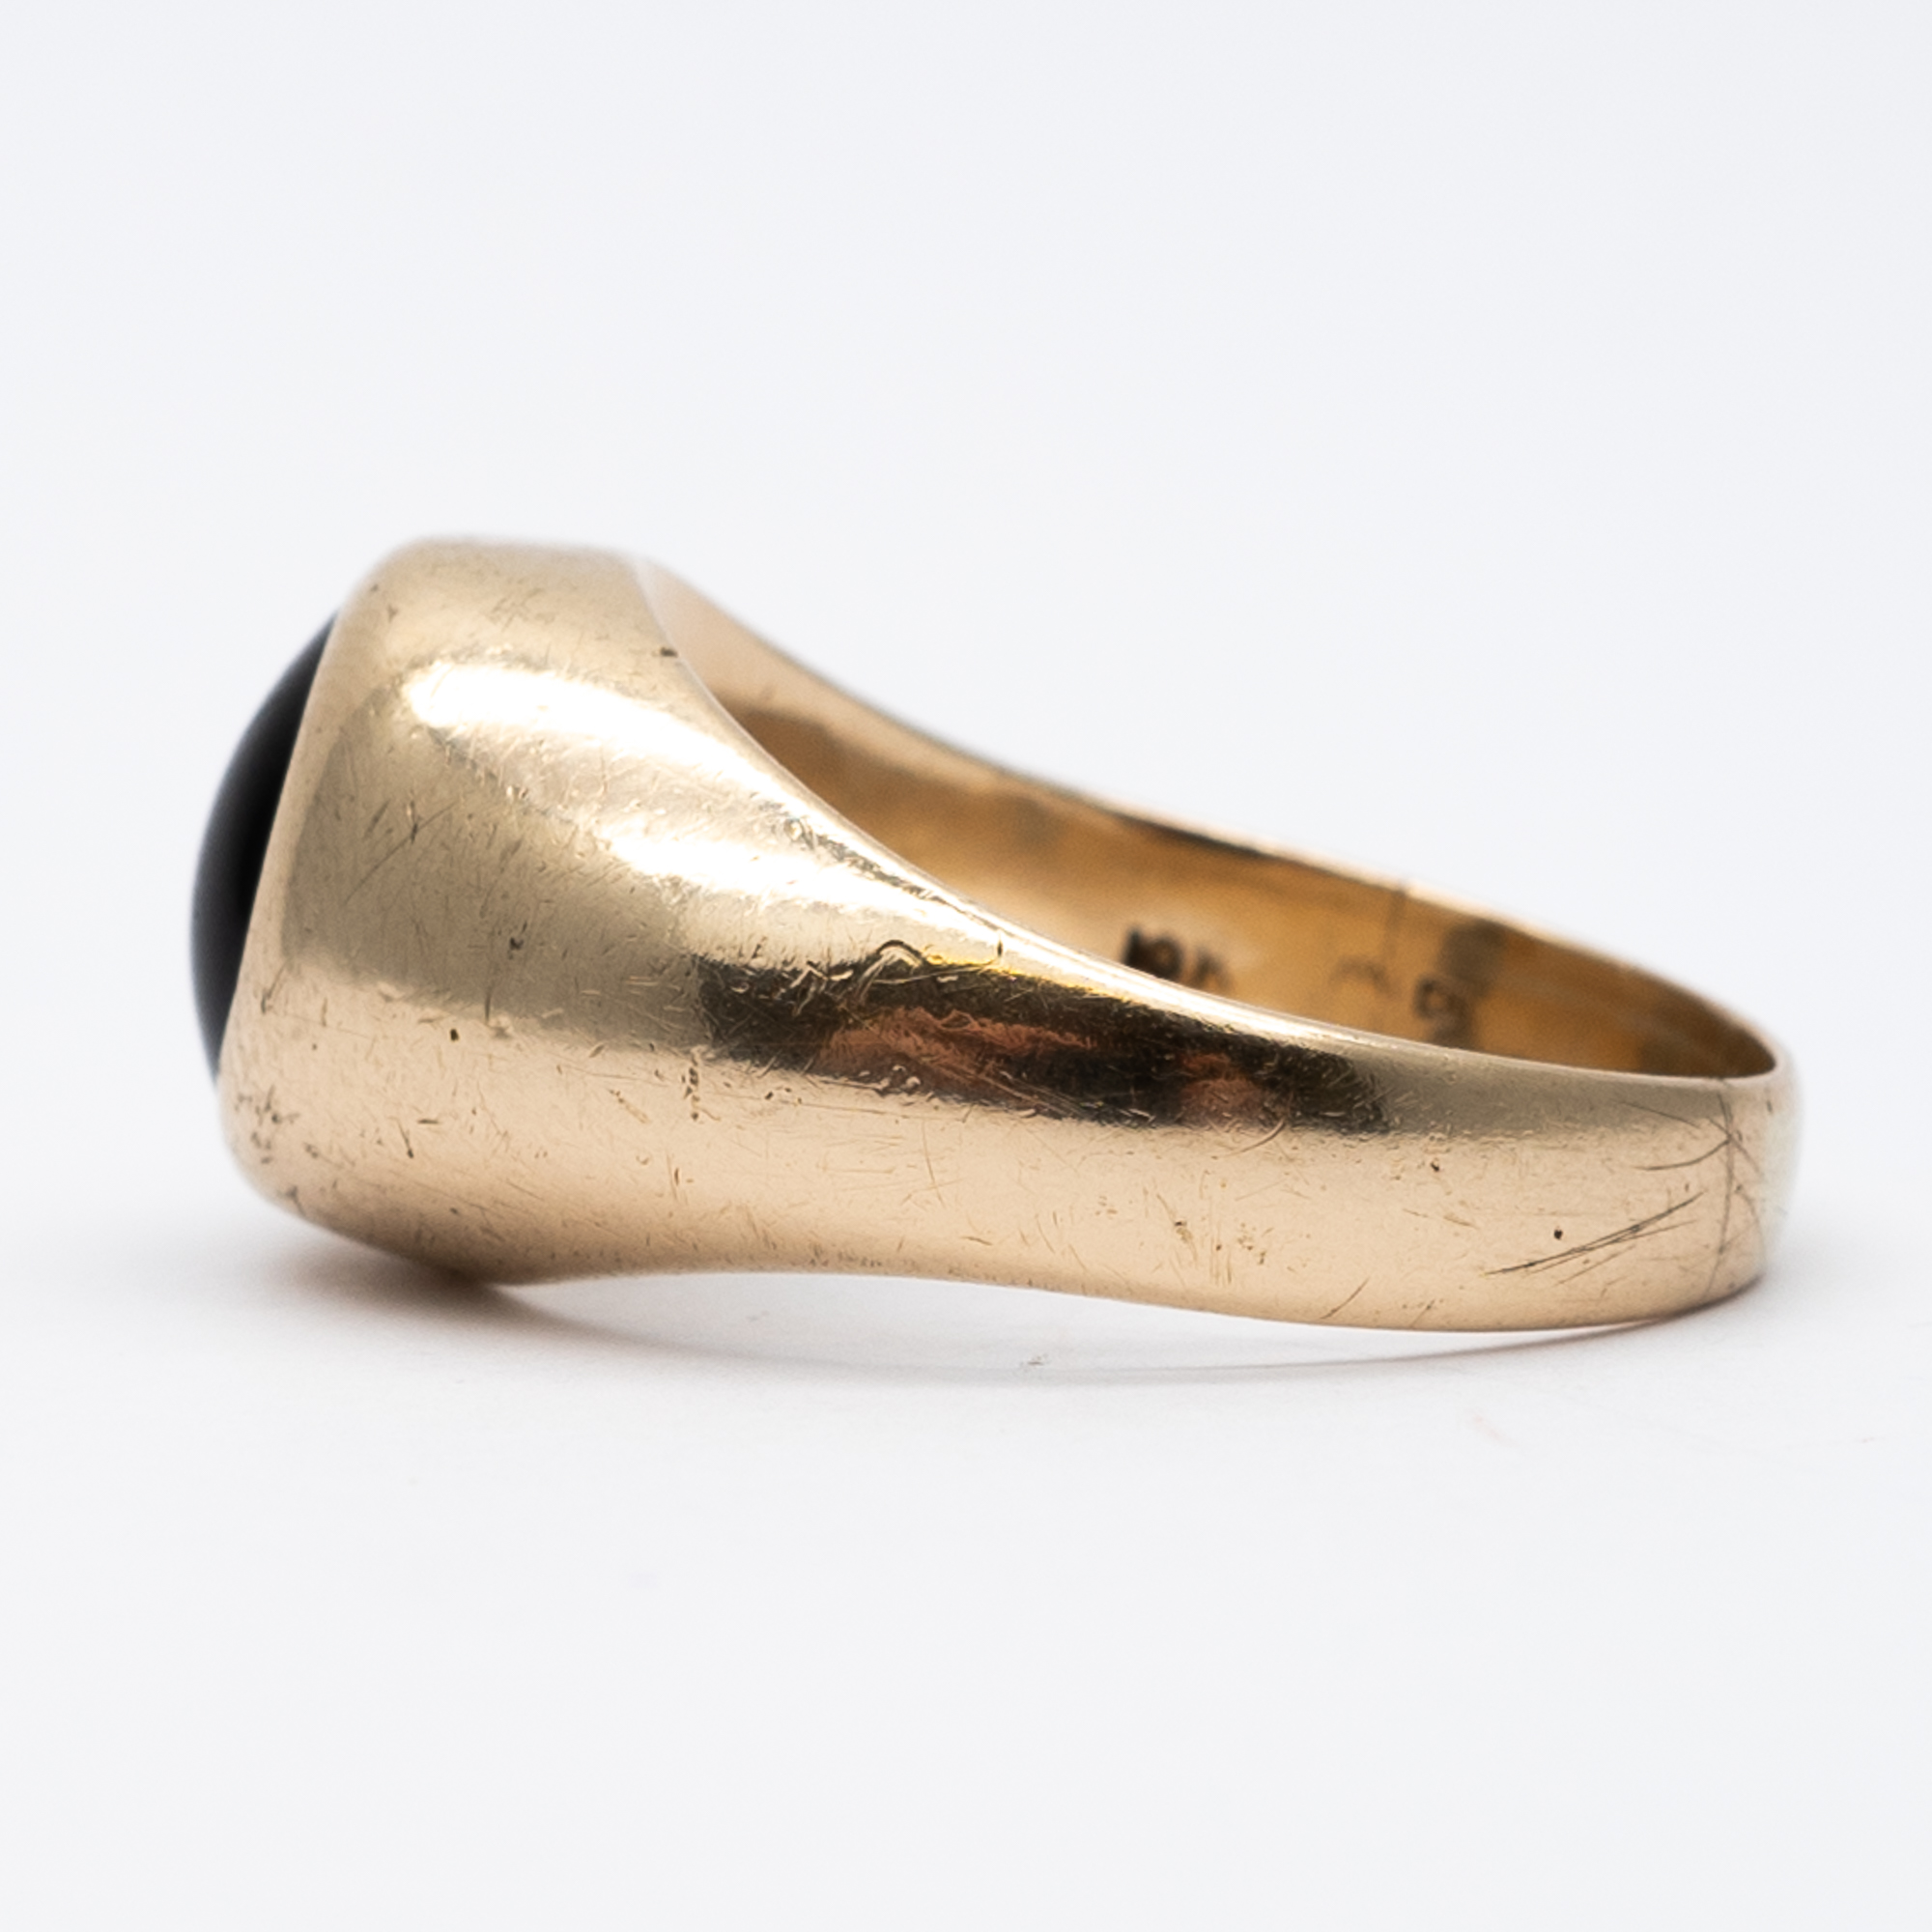 A 9ct yellow gold gypsy ring - Image 2 of 6